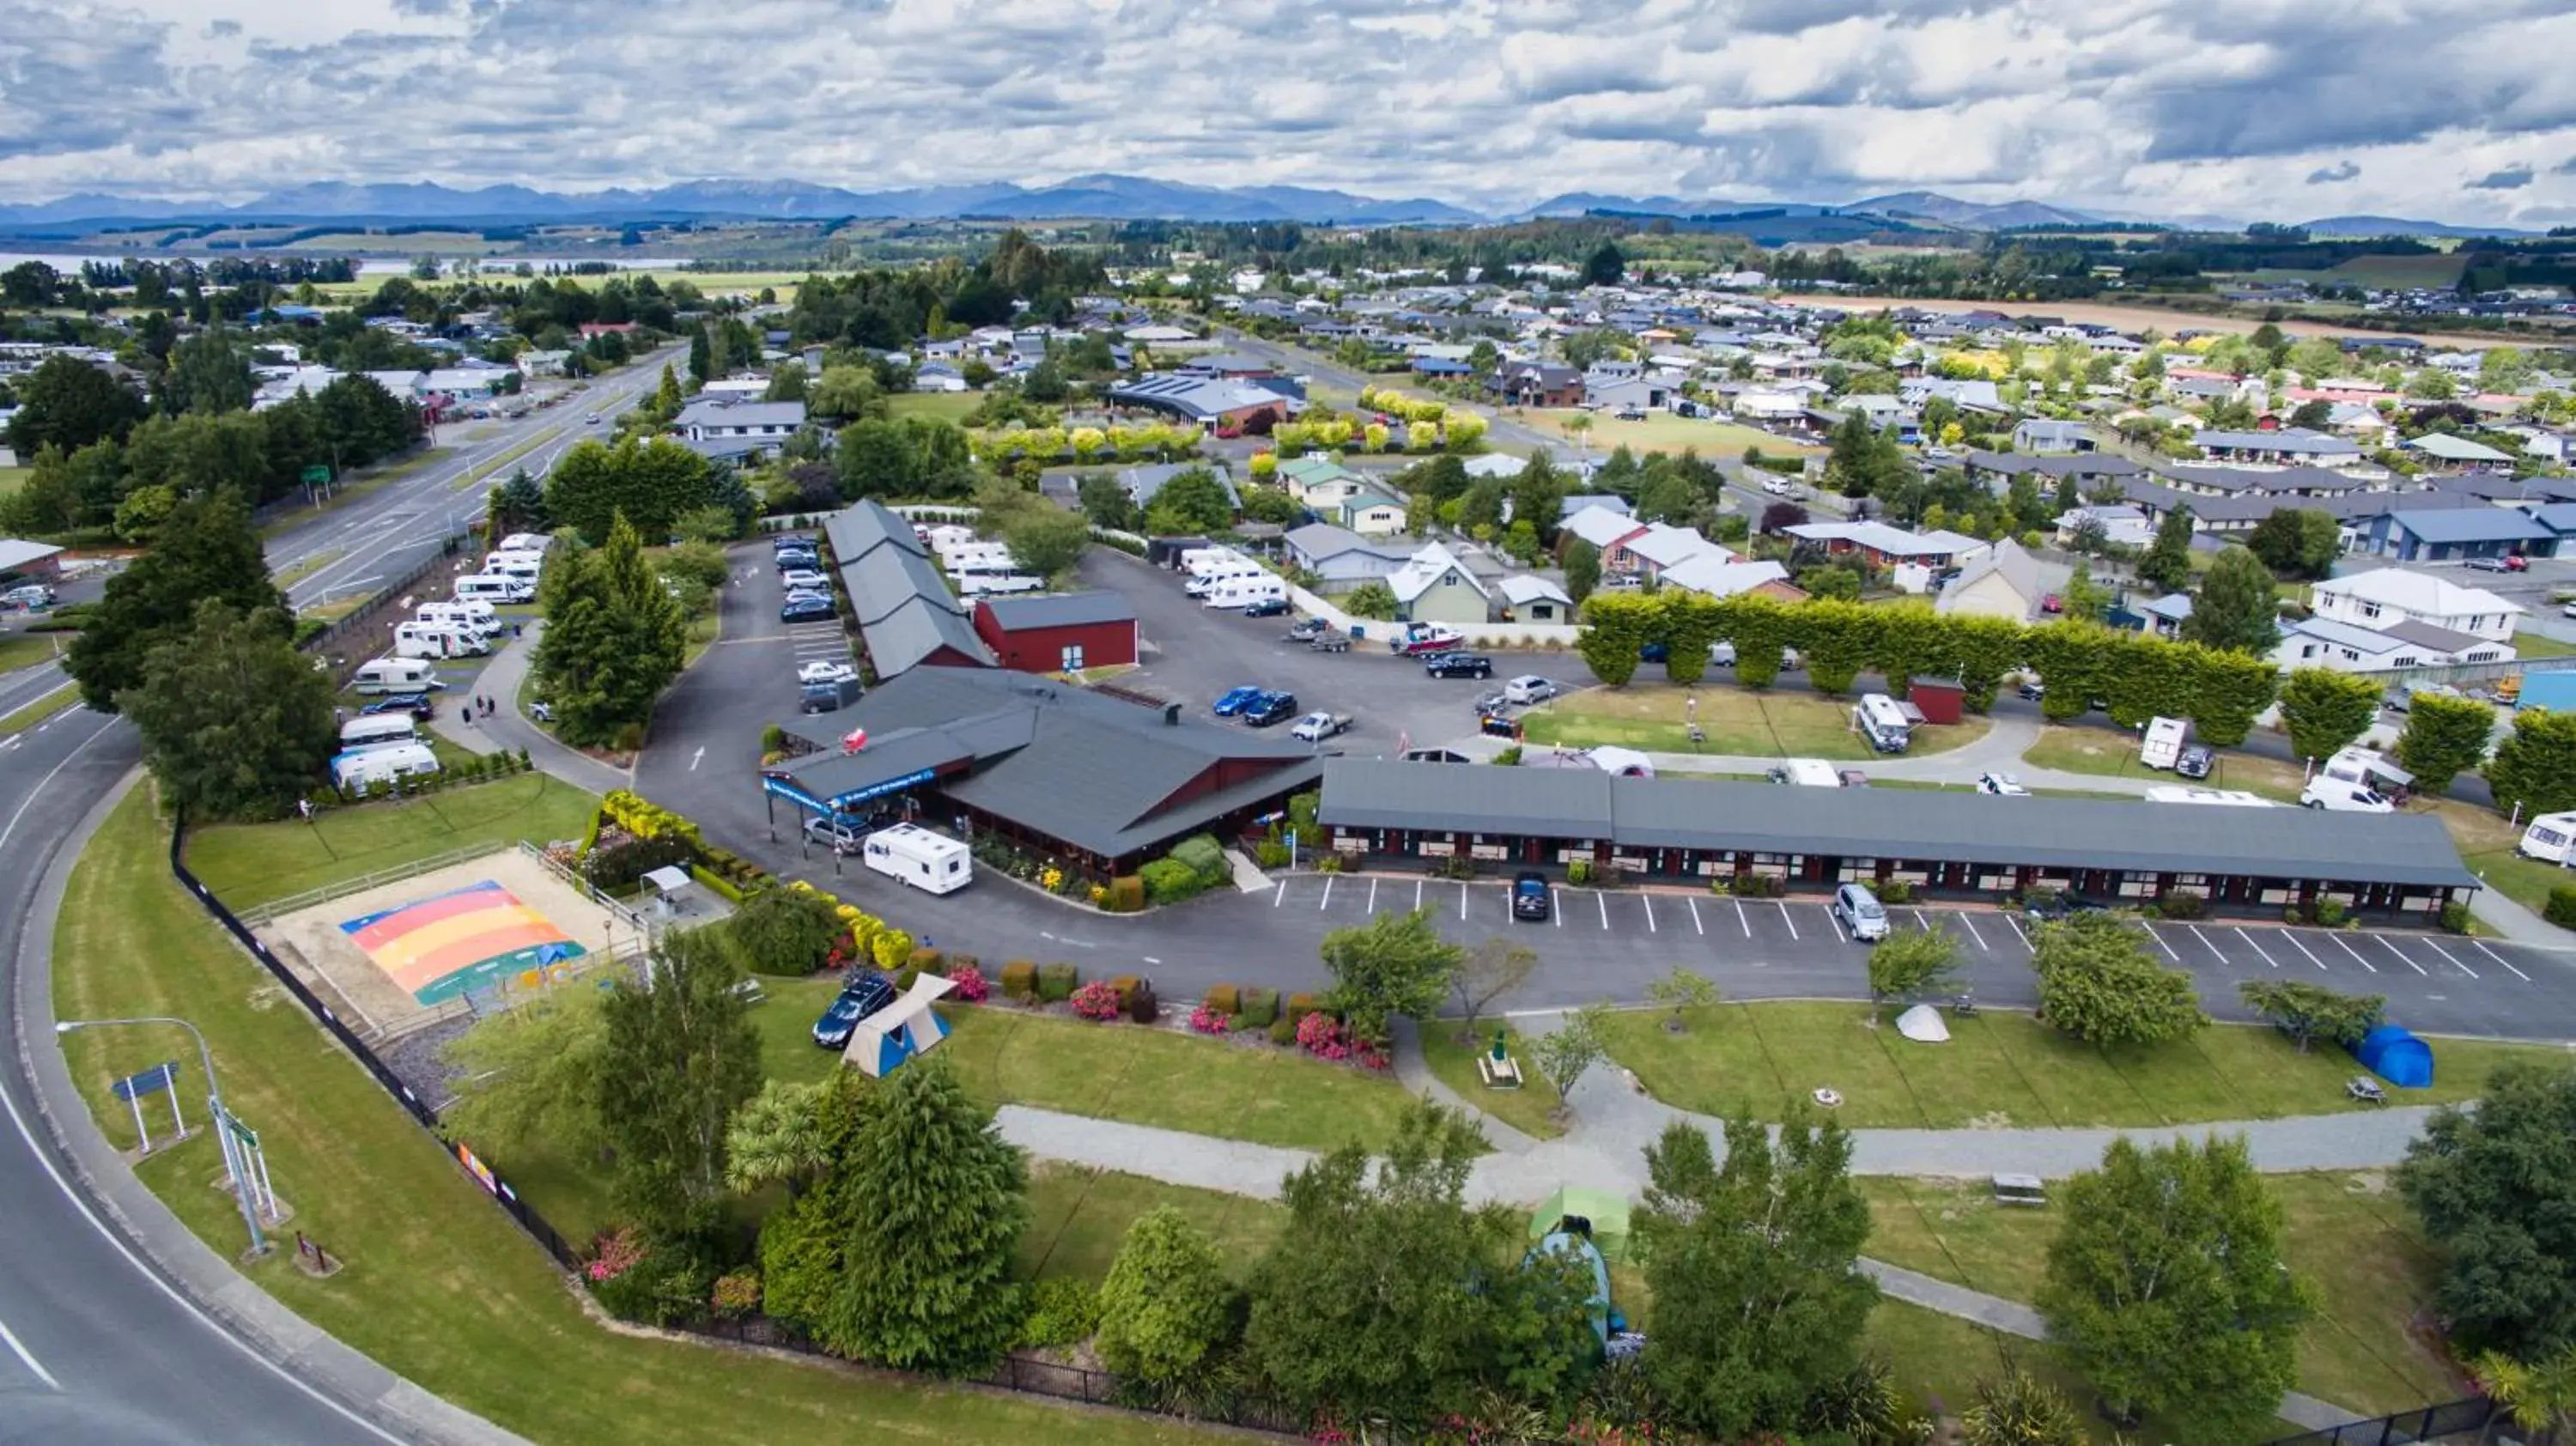 On site, Bird's-eye View in Te Anau Top 10 Holiday Park and Motels